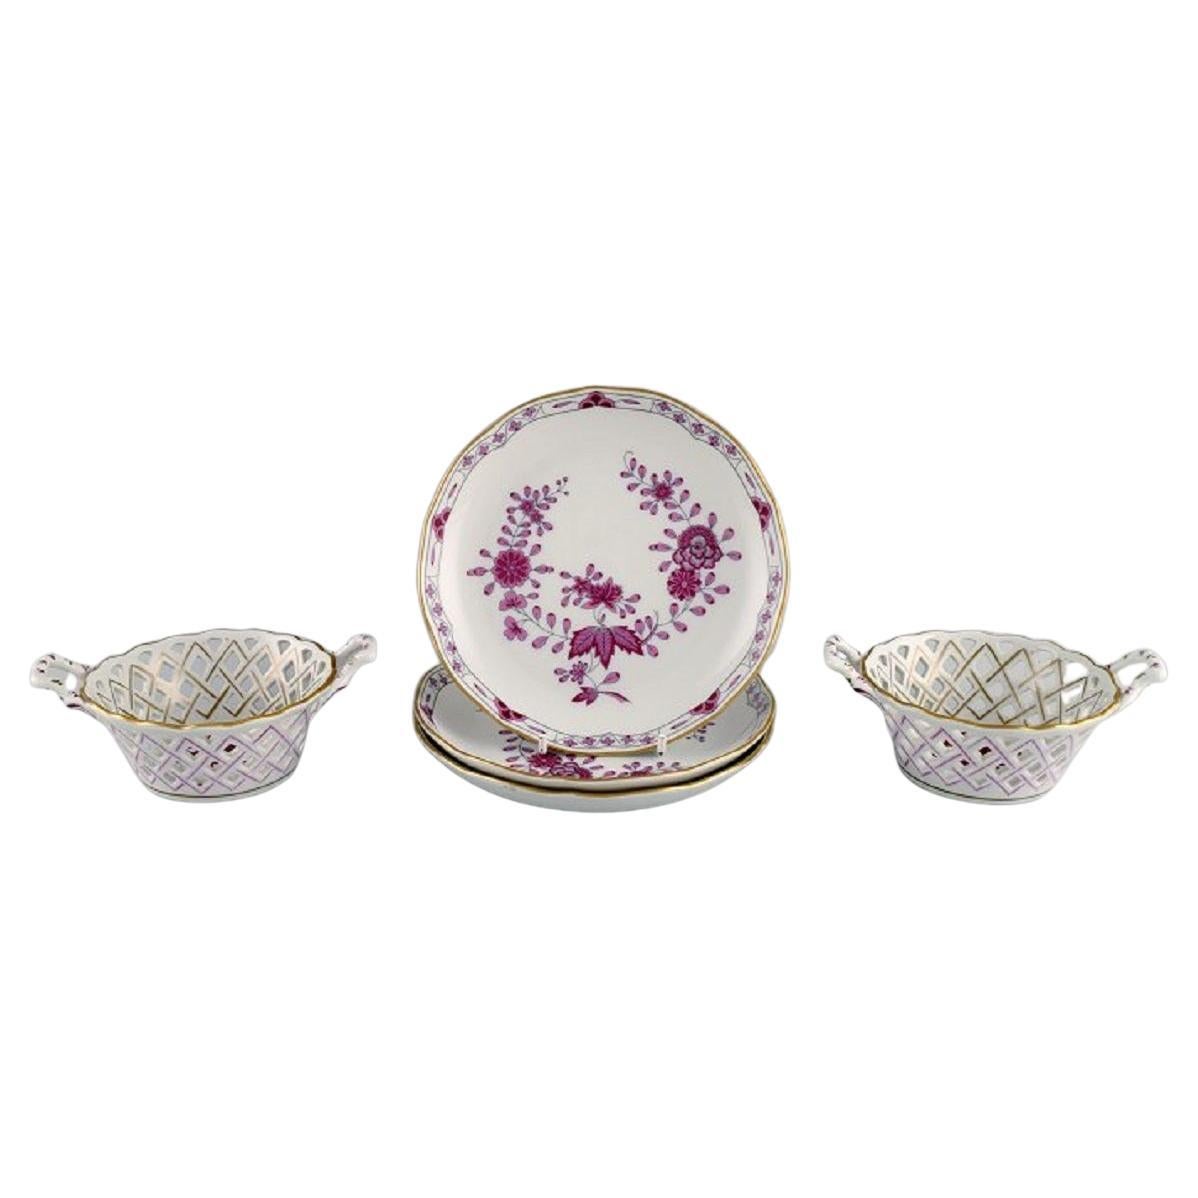 Hutschenreuther, Germany. Three plates and two bowls in openwork porcelain.